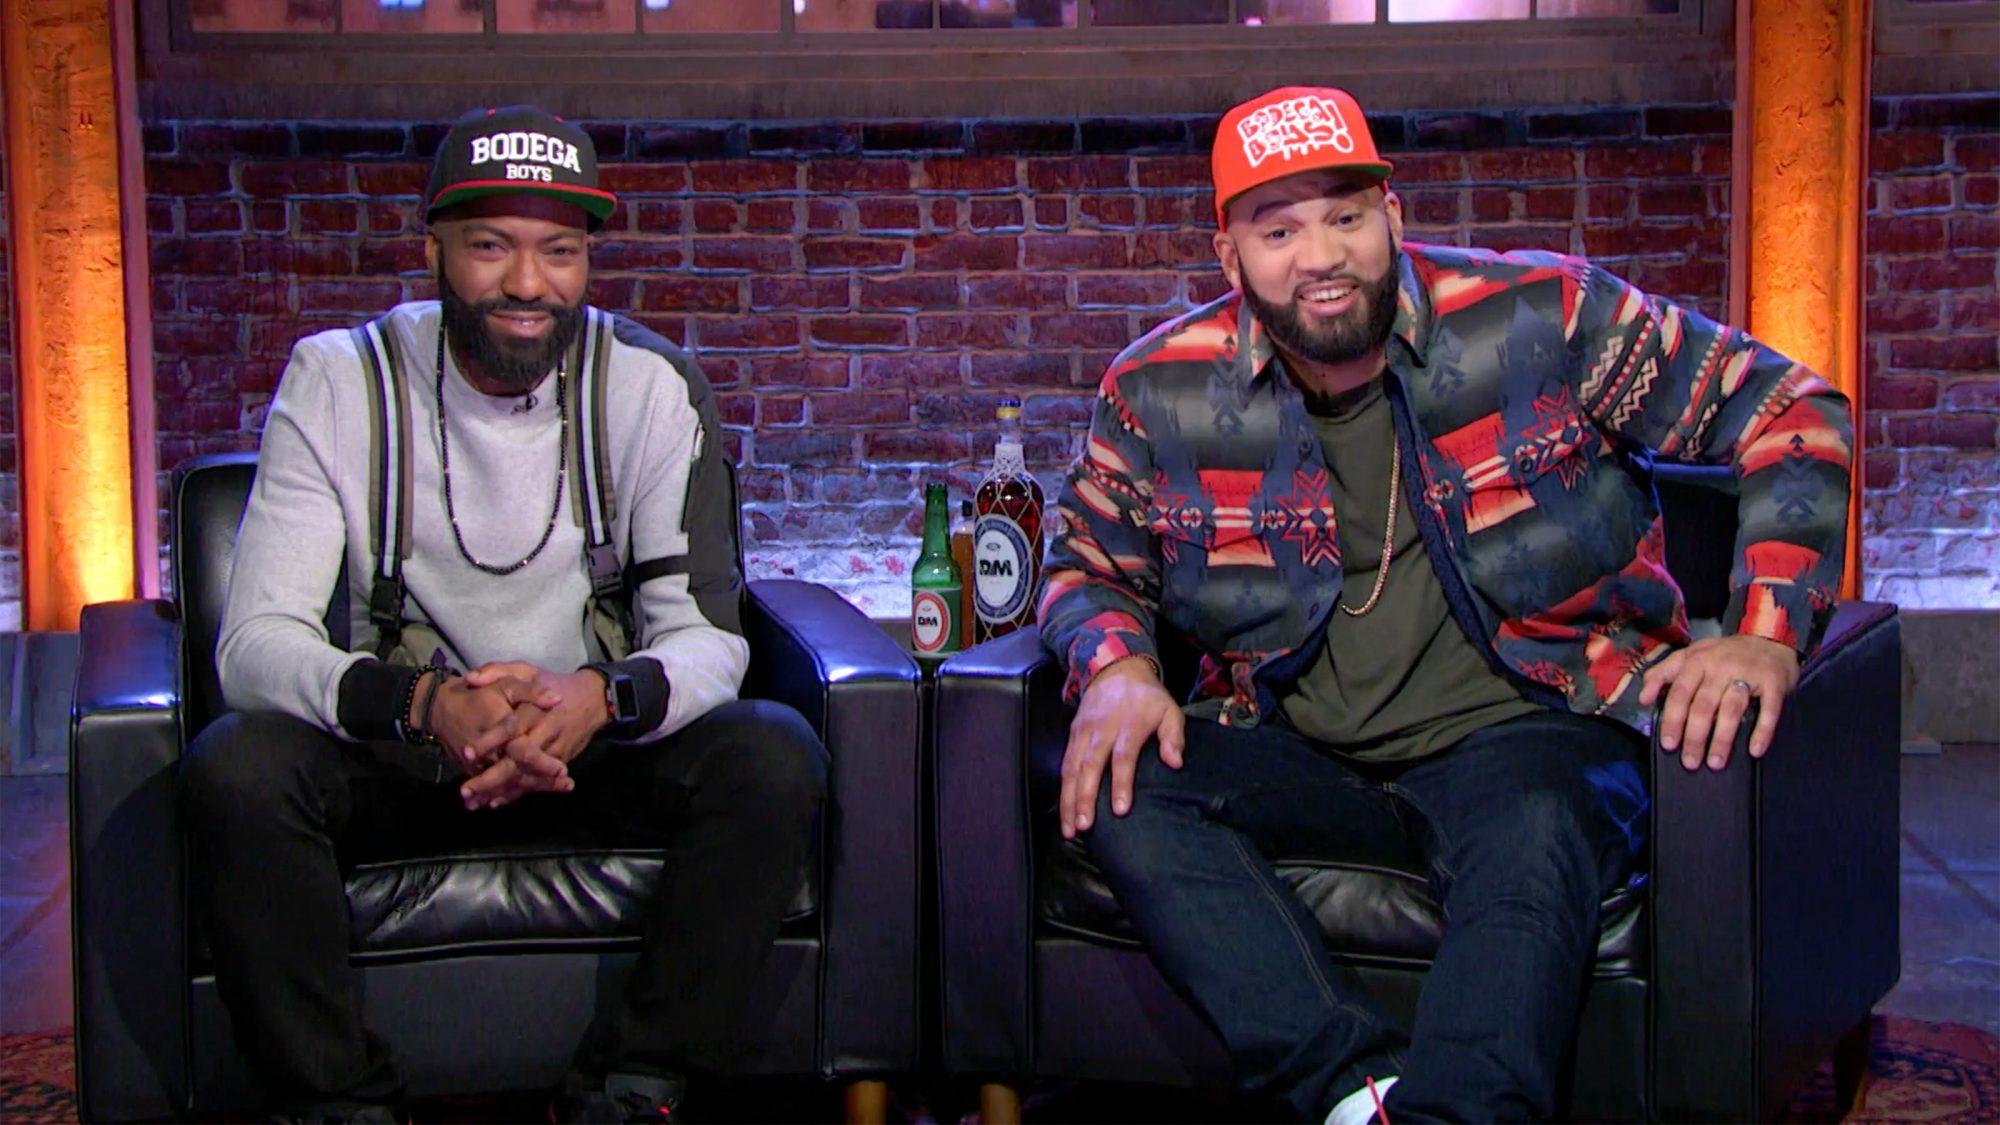 Who Are Desus And Mero, Why Are They Breaking Up? The Bodega Boys Podcast Hosts Split - But Is It True?